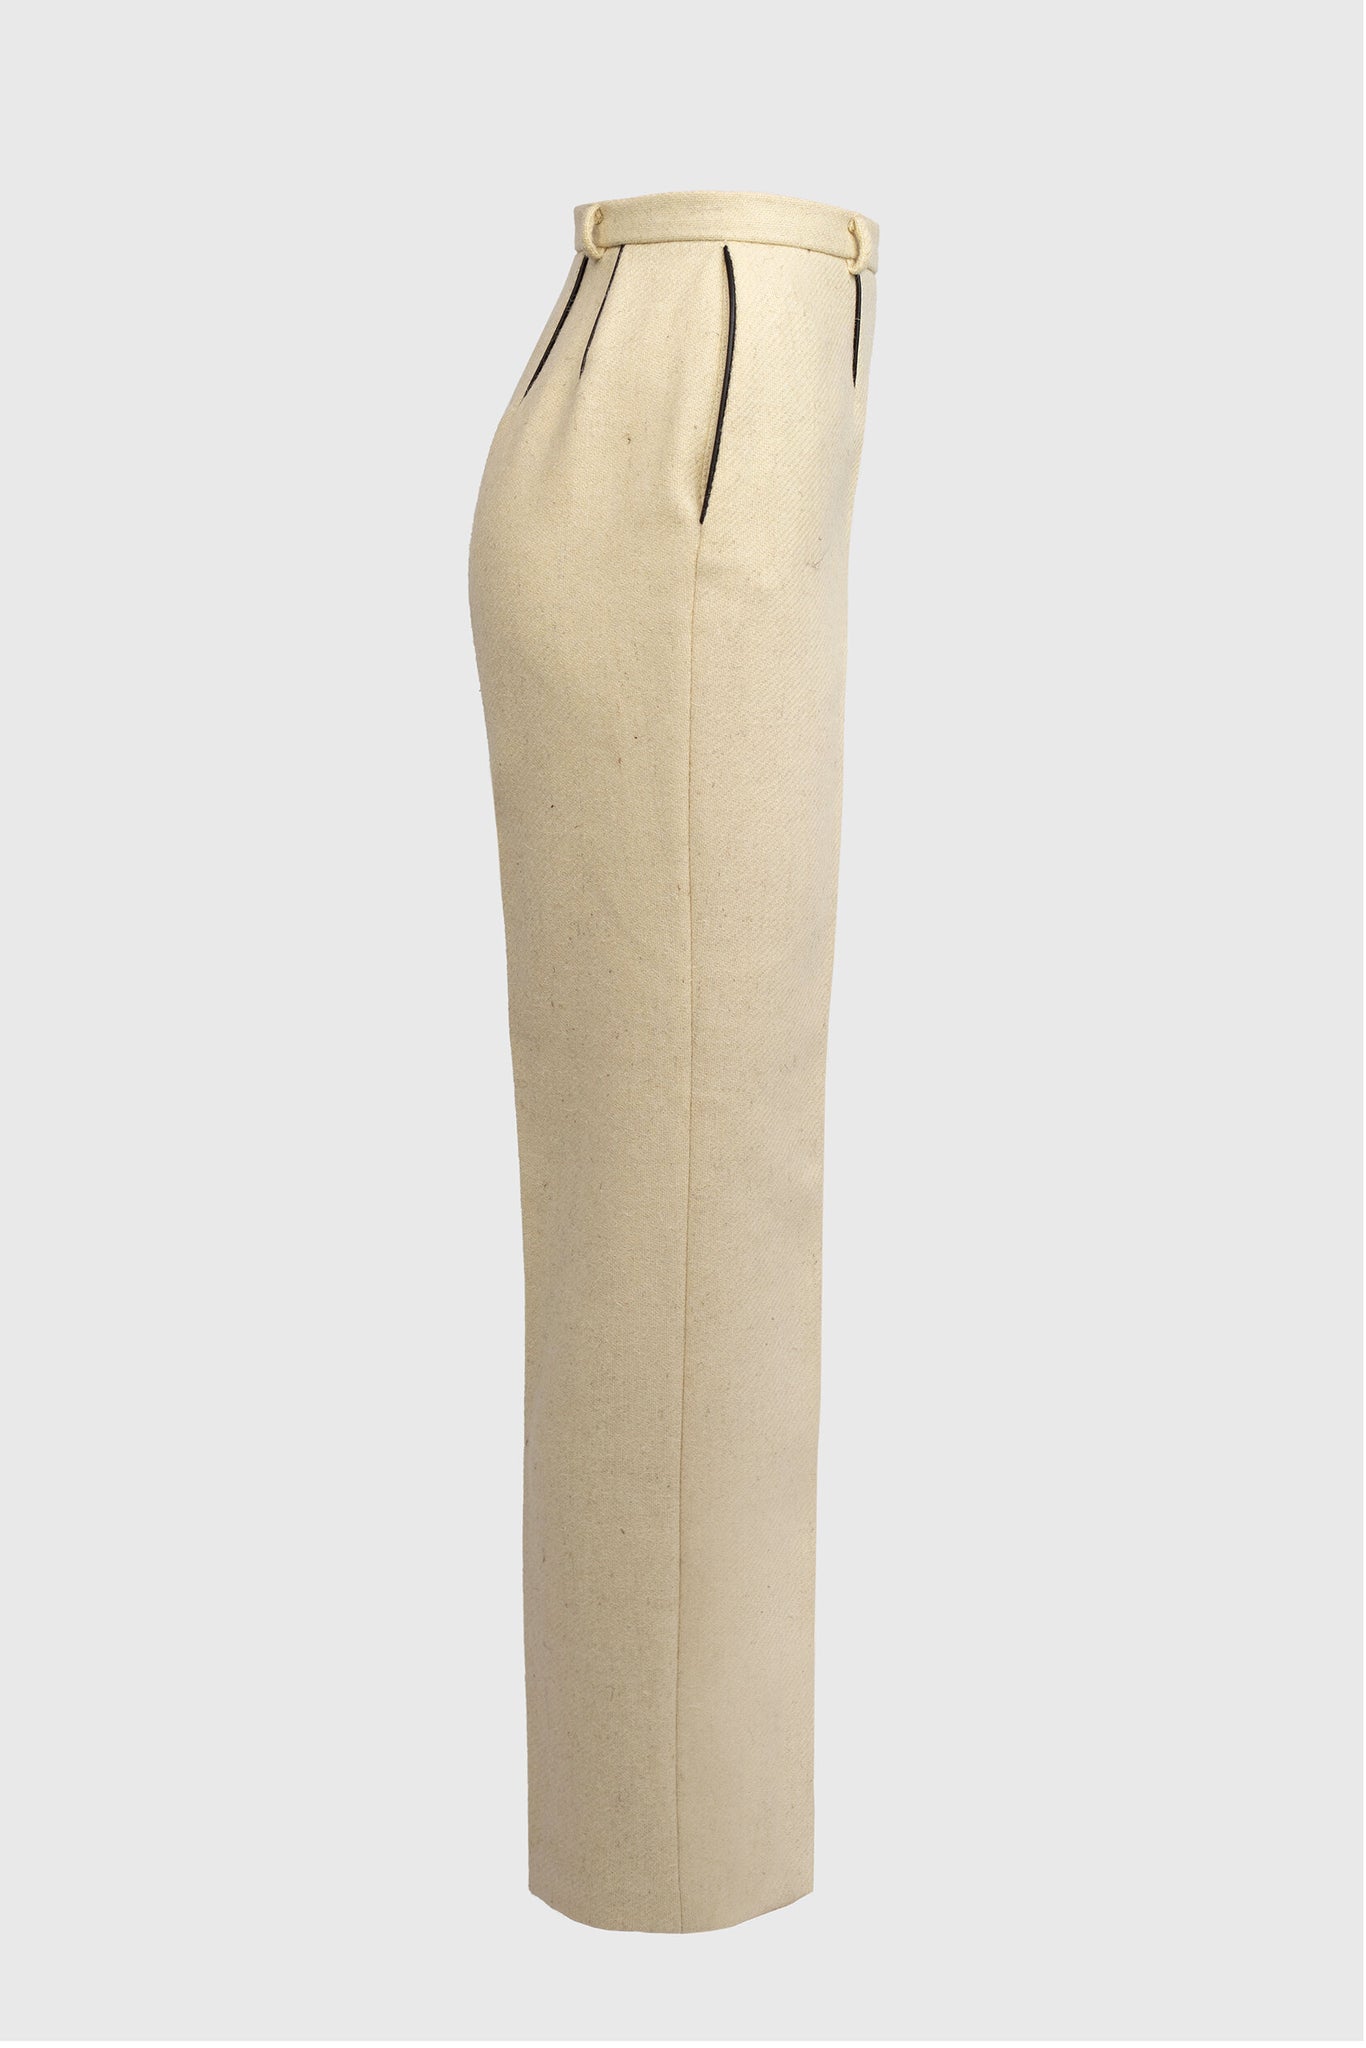 Butter White Wool Trousers